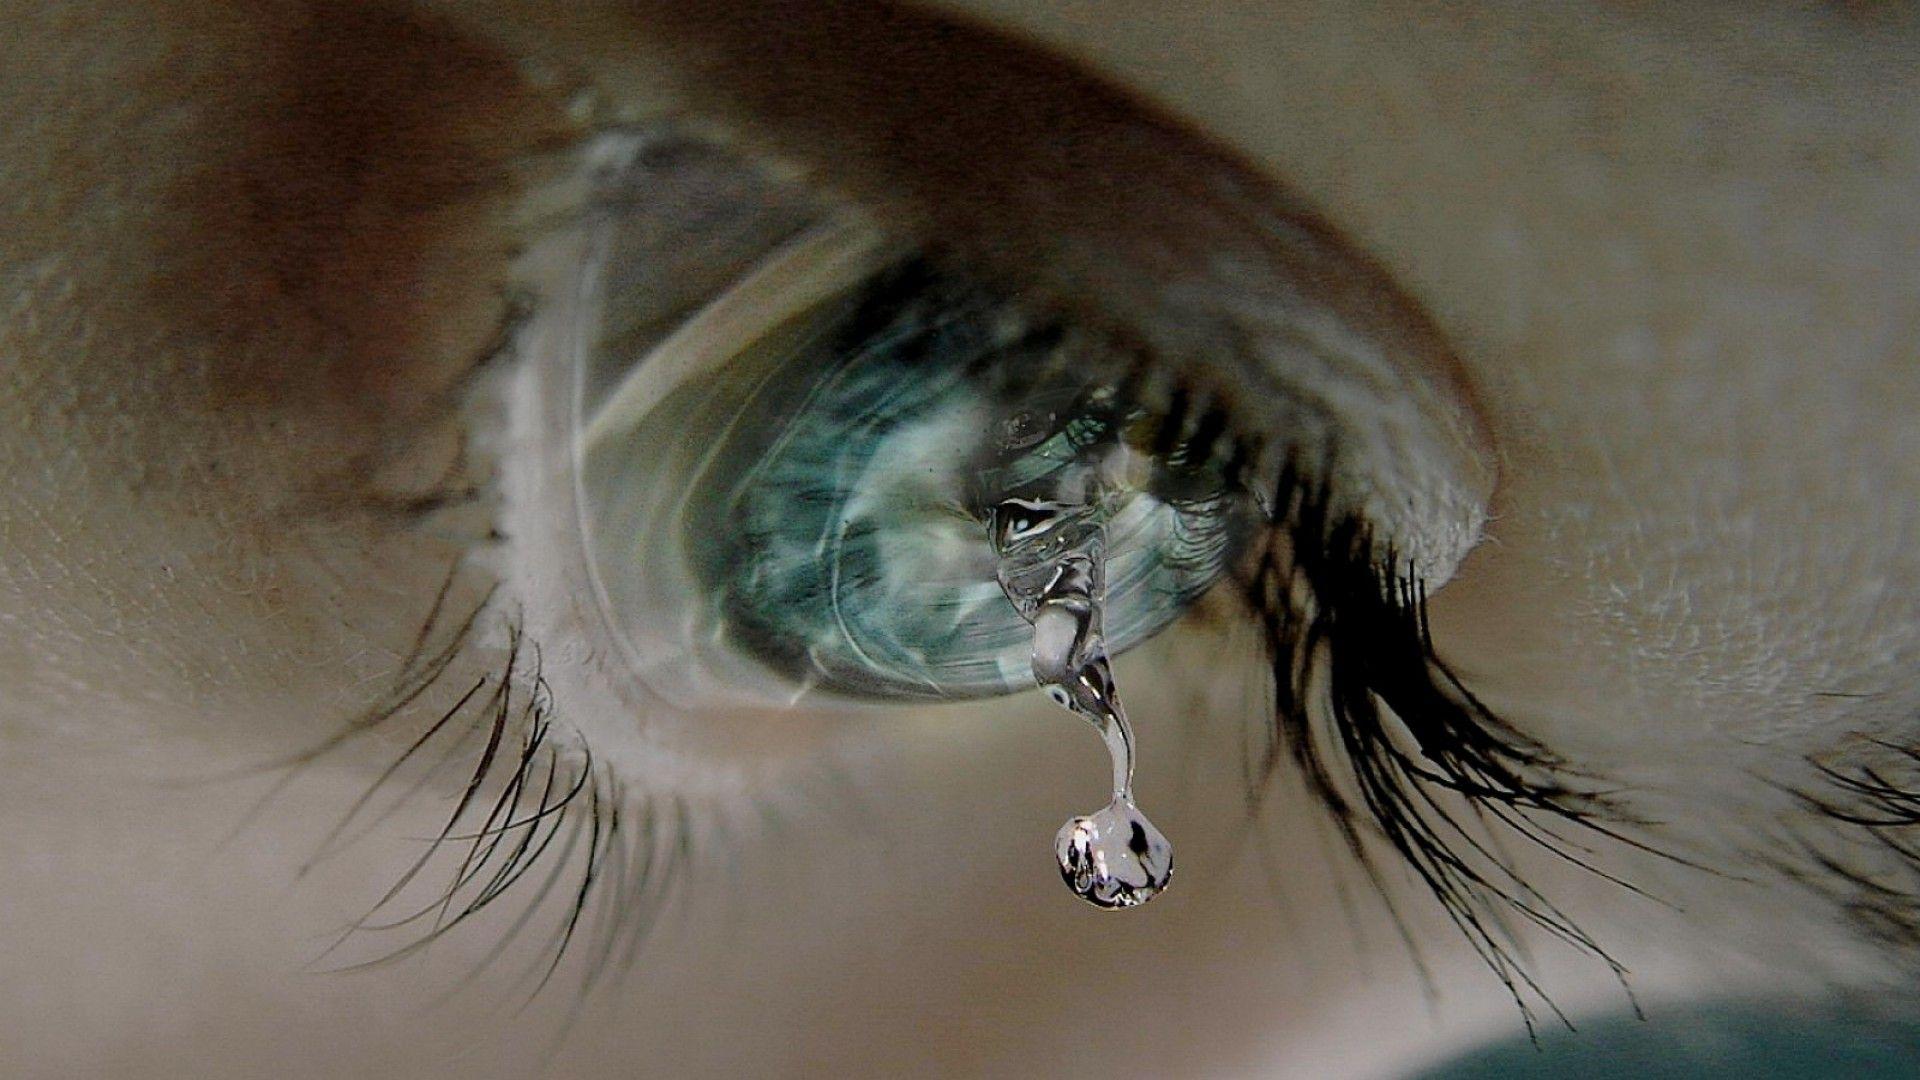 Most Beautiful Eyes with Tears Wallpaper 8. Cry Me A River